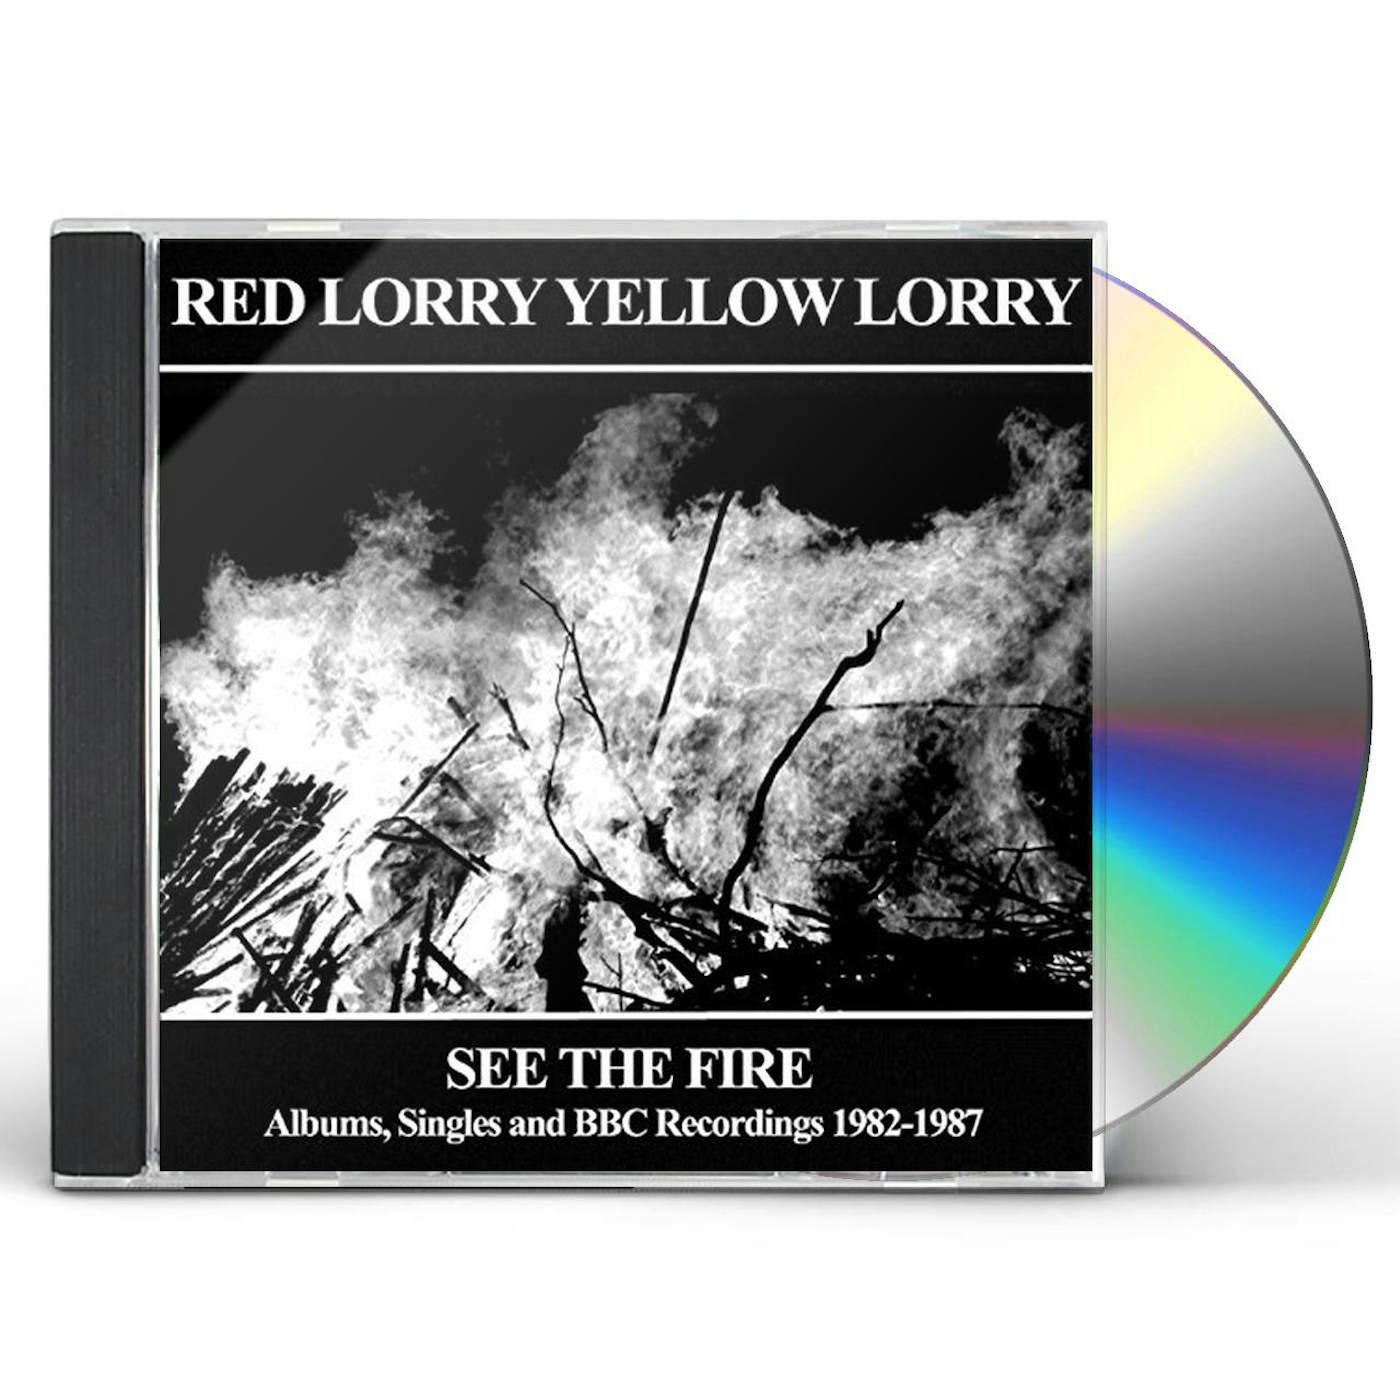 Red Lorry Yellow Lorry SEE THE FIRE: ALBUMS SINGLES CD